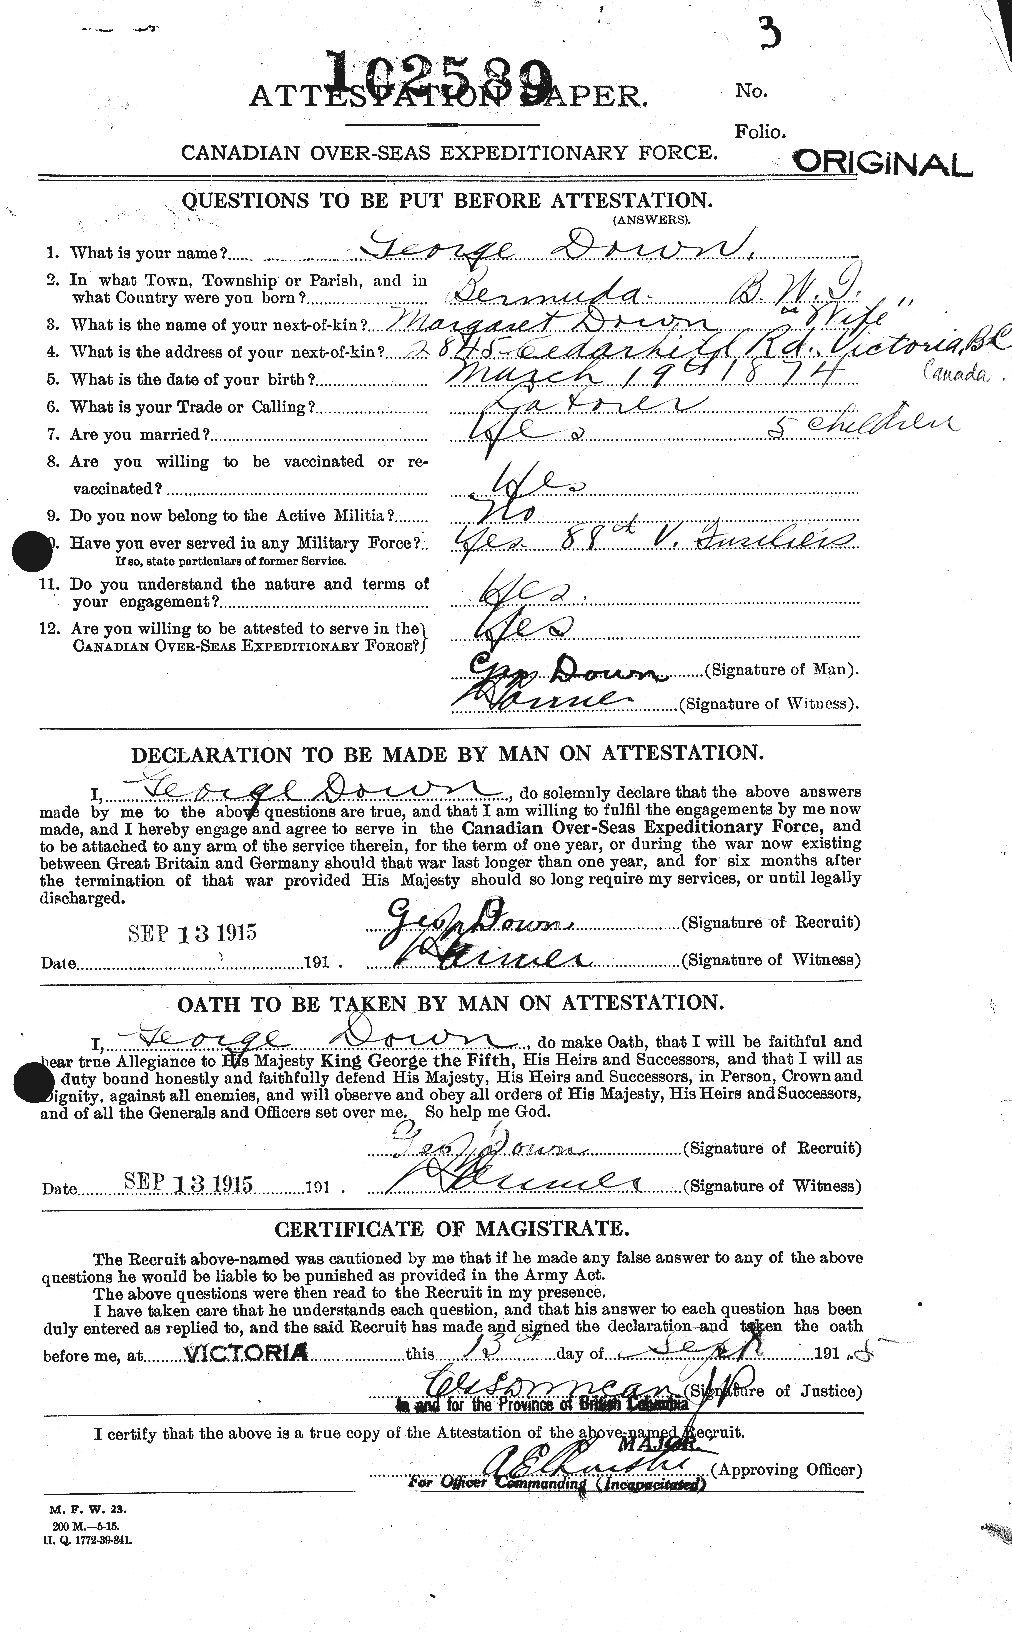 Personnel Records of the First World War - CEF 301051a